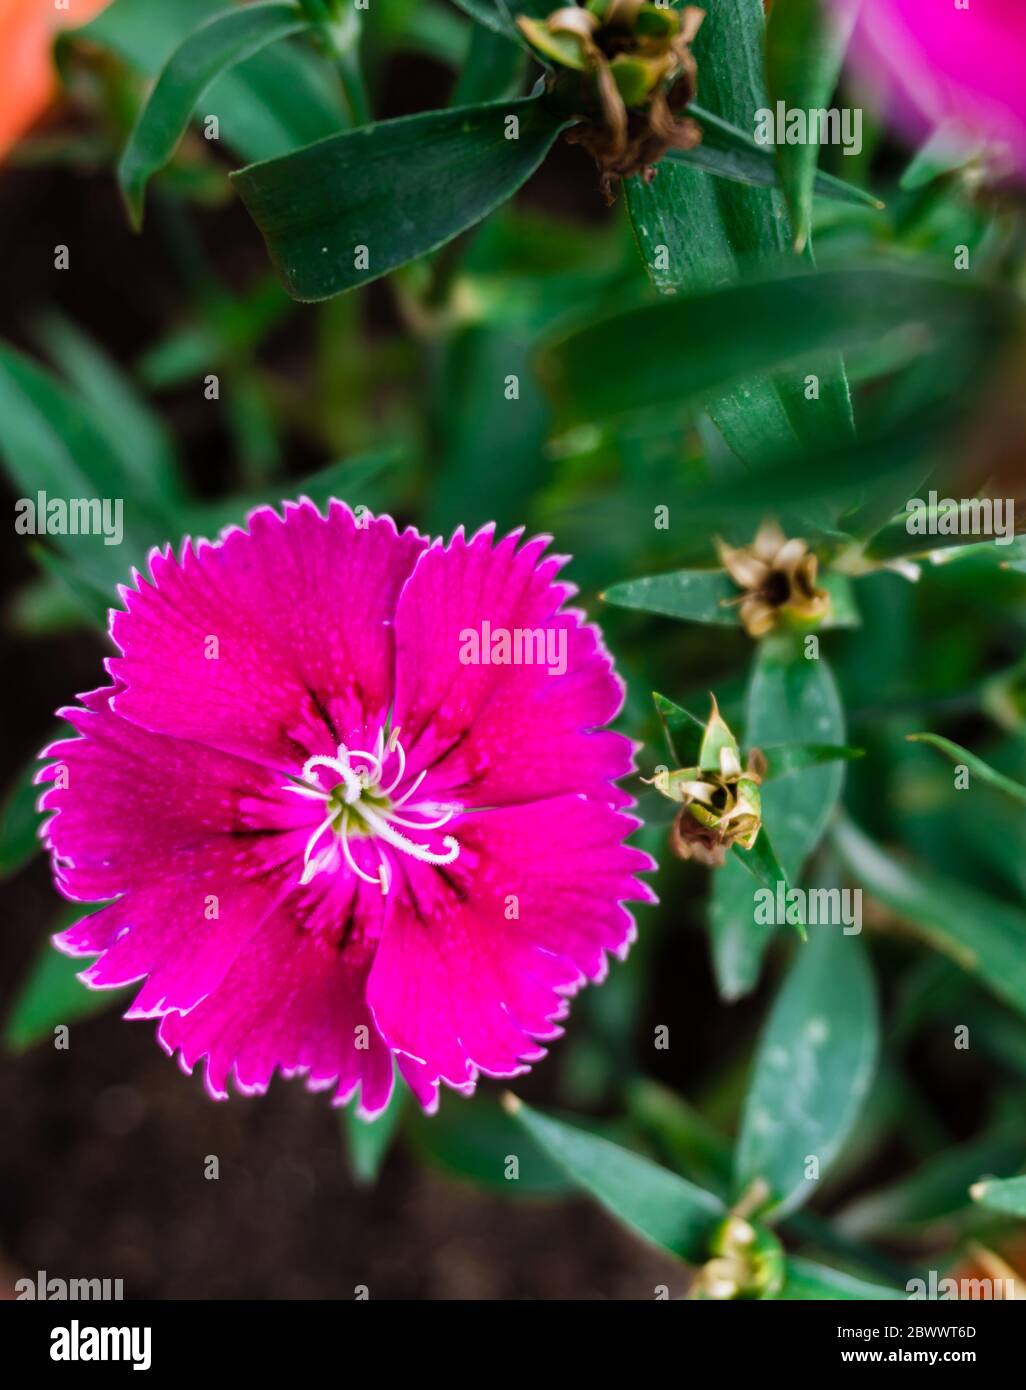 A clsoe up shot of MAIDEN PINK flowers on a pot.Dianthus deltoides, the maiden pink, is a species of Dianthus native to most of Europe and western Asi Stock Photo